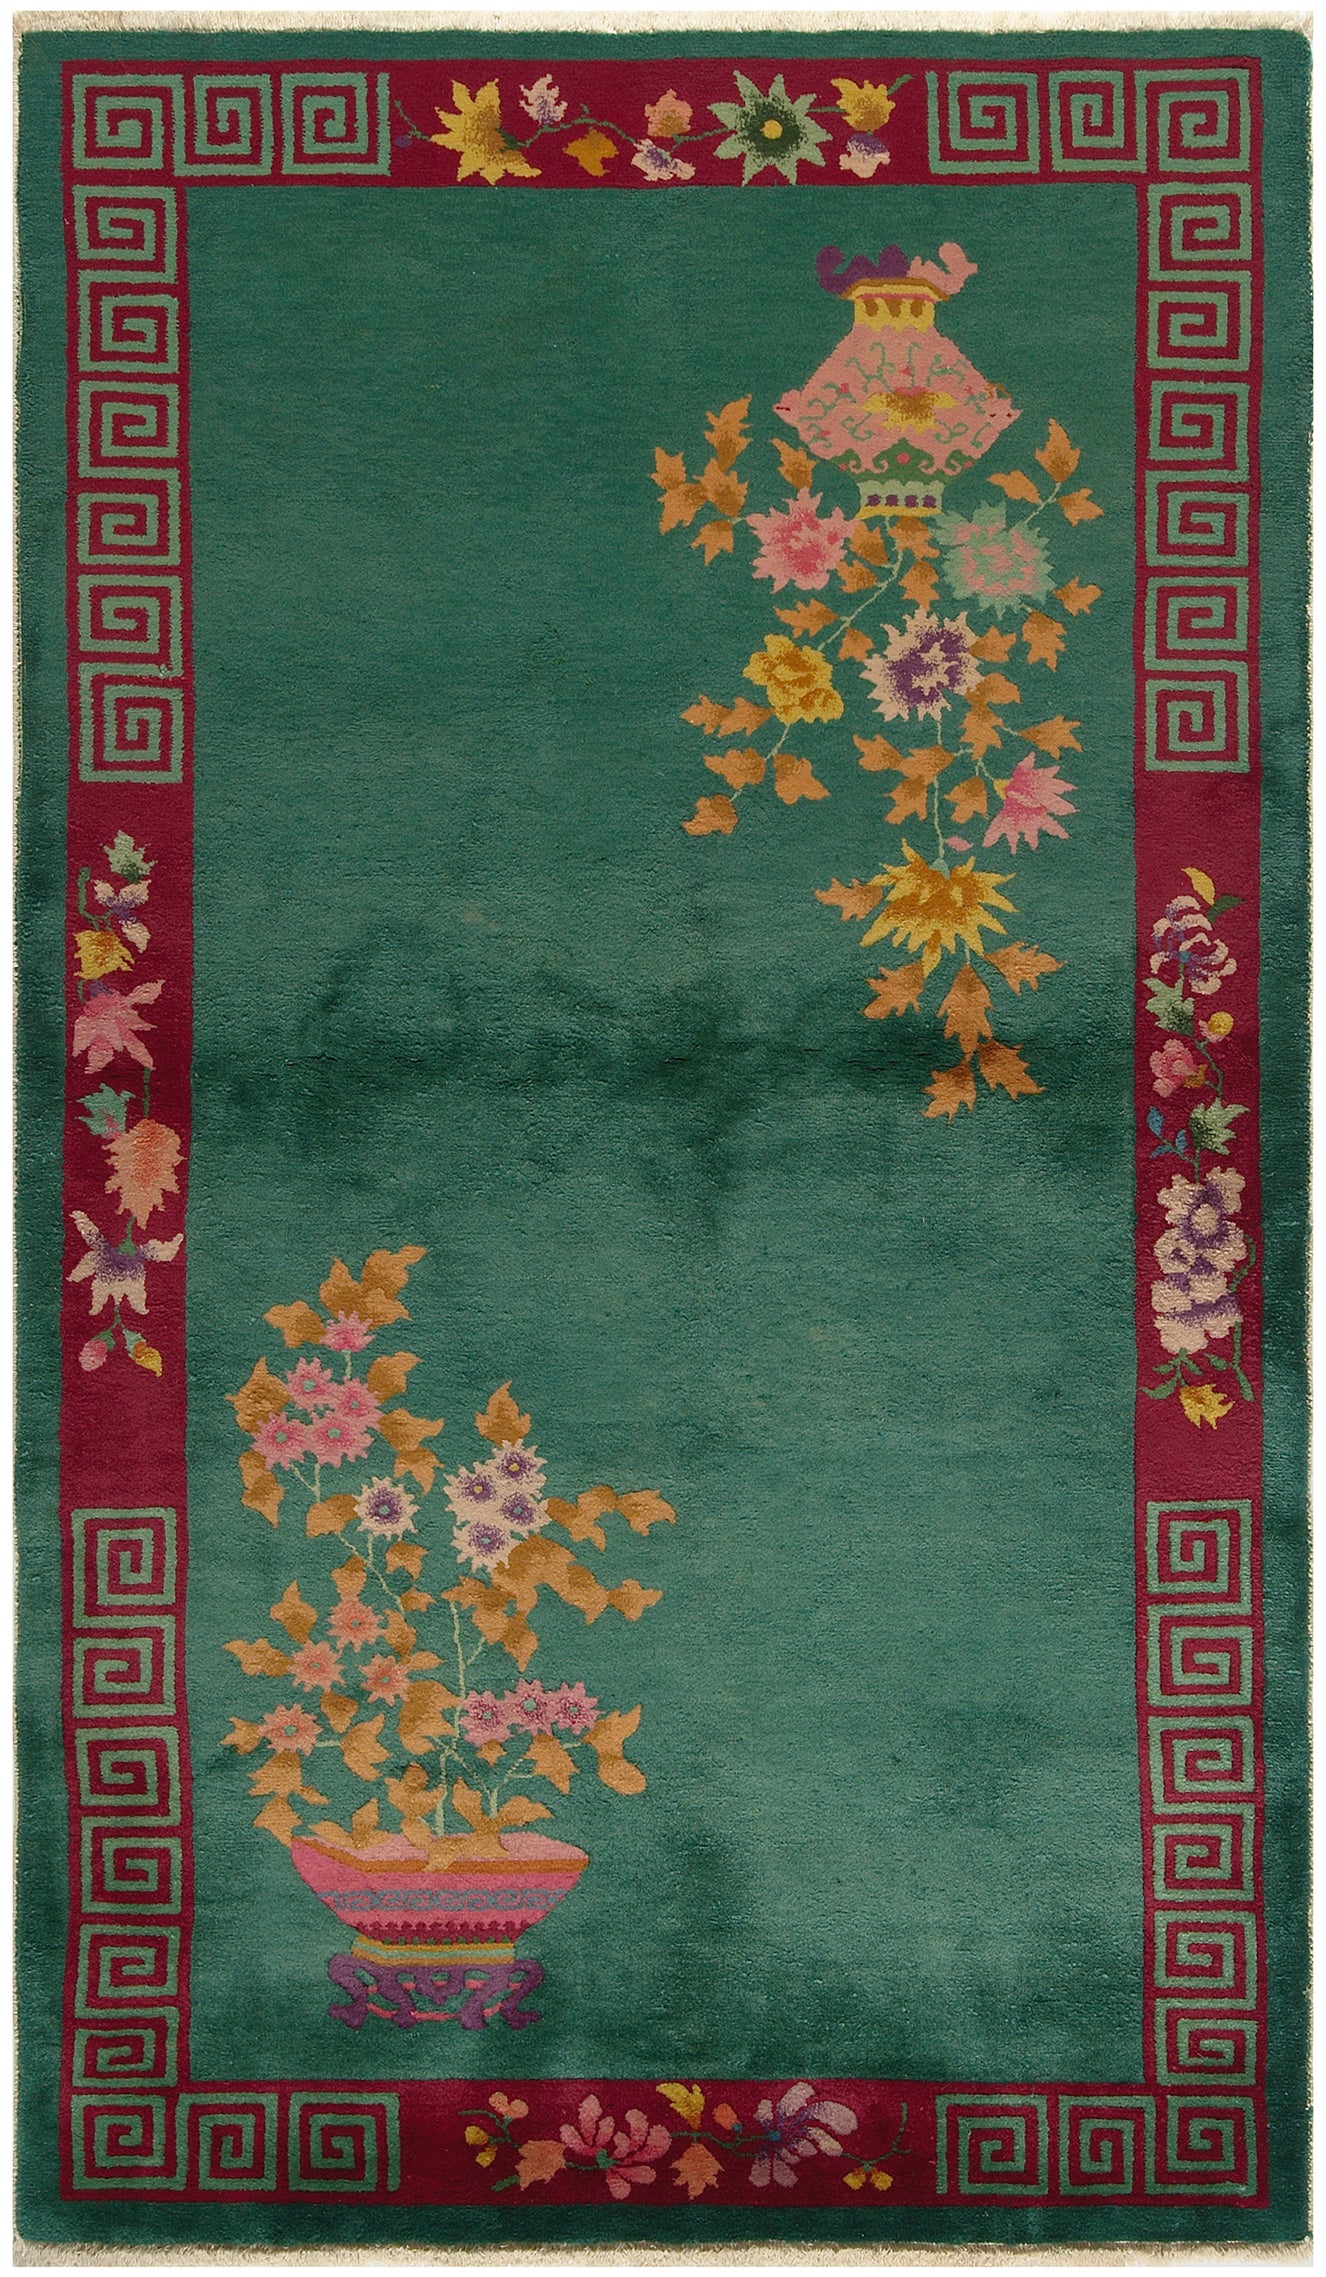 7'x4' Green and Red Floral Vintage Chinese Art Deco Rug